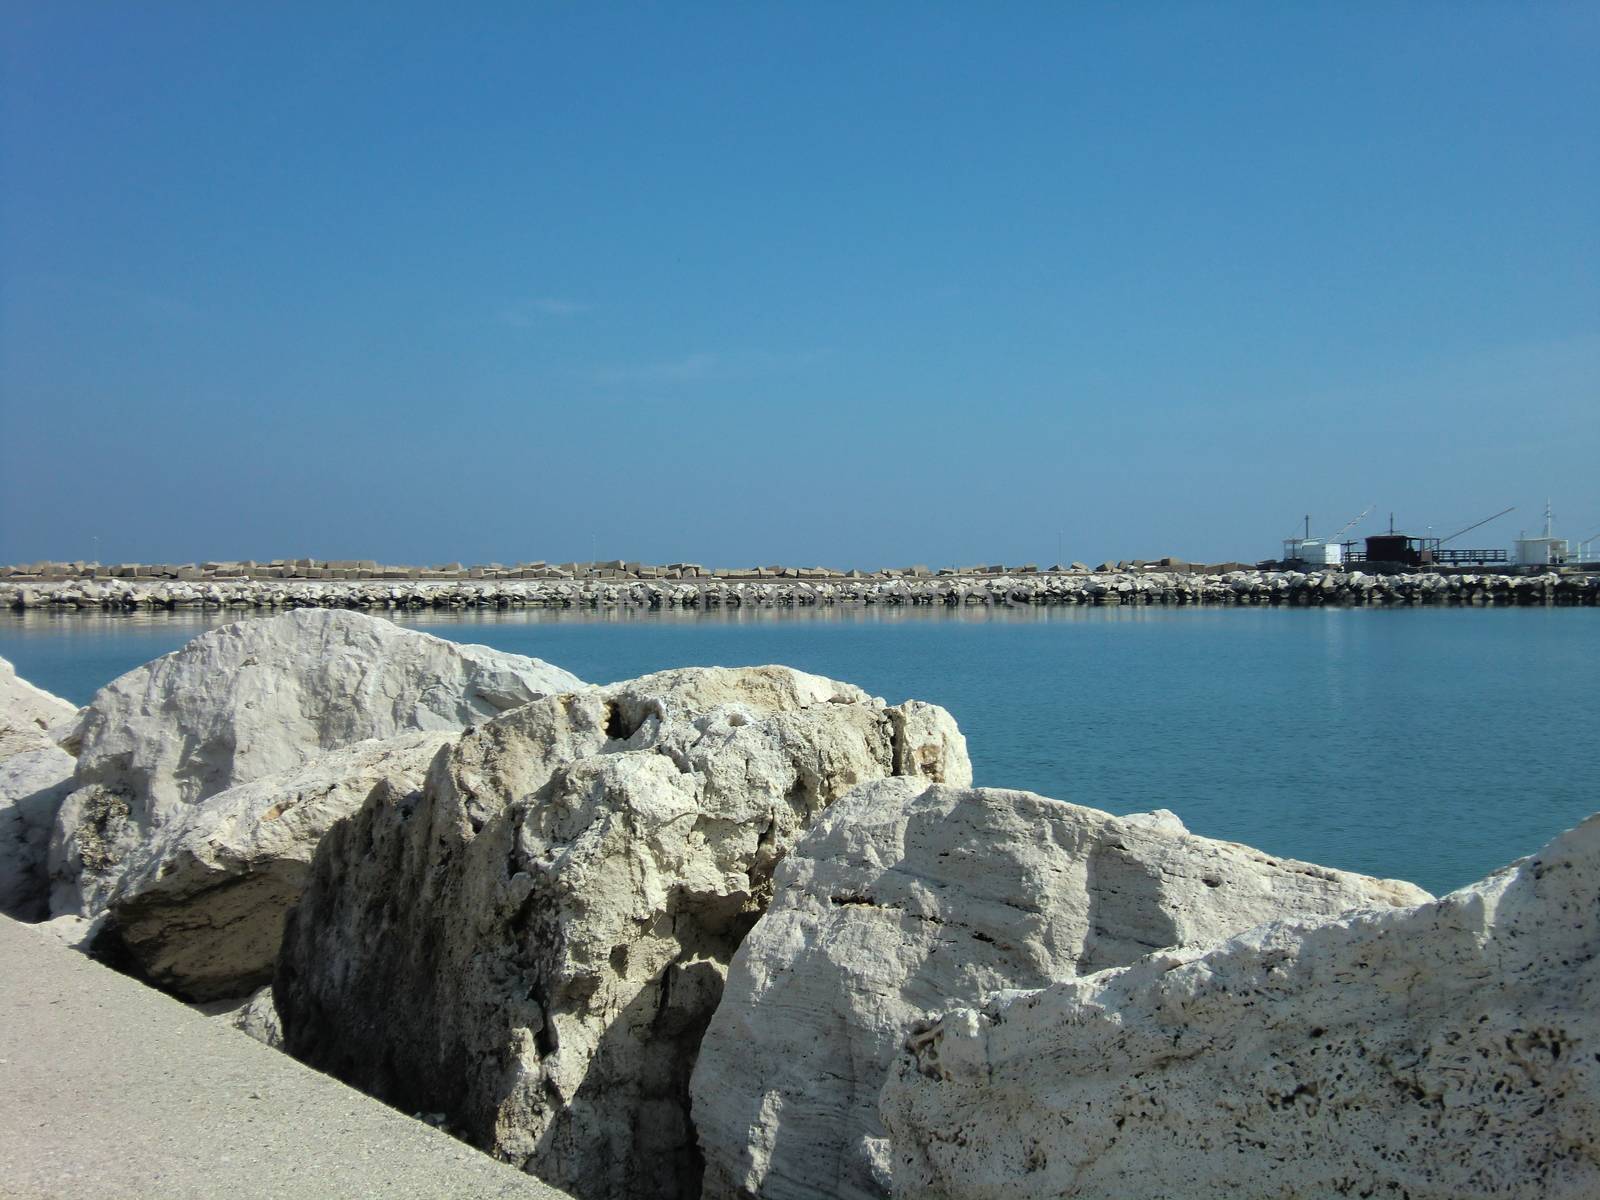 View of the port of the Italian city of Giulianova during day